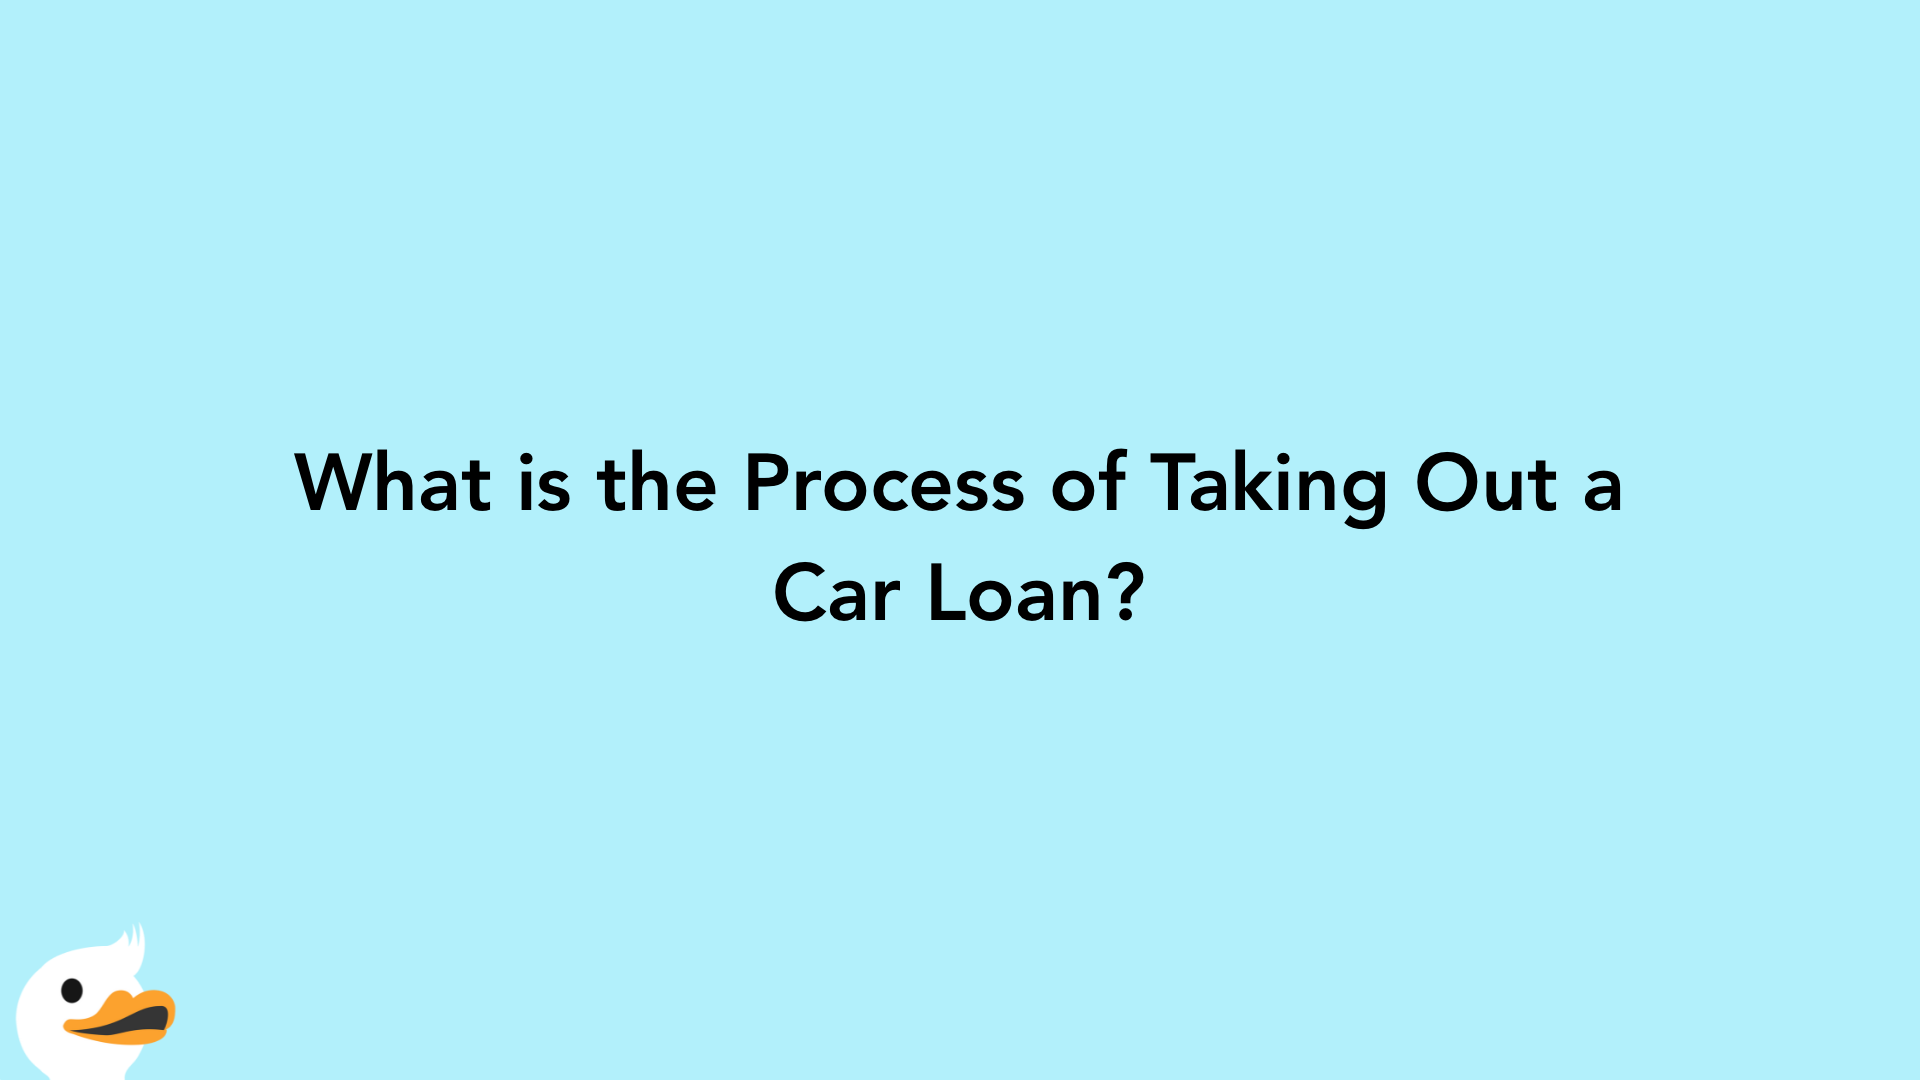 What is the Process of Taking Out a Car Loan?